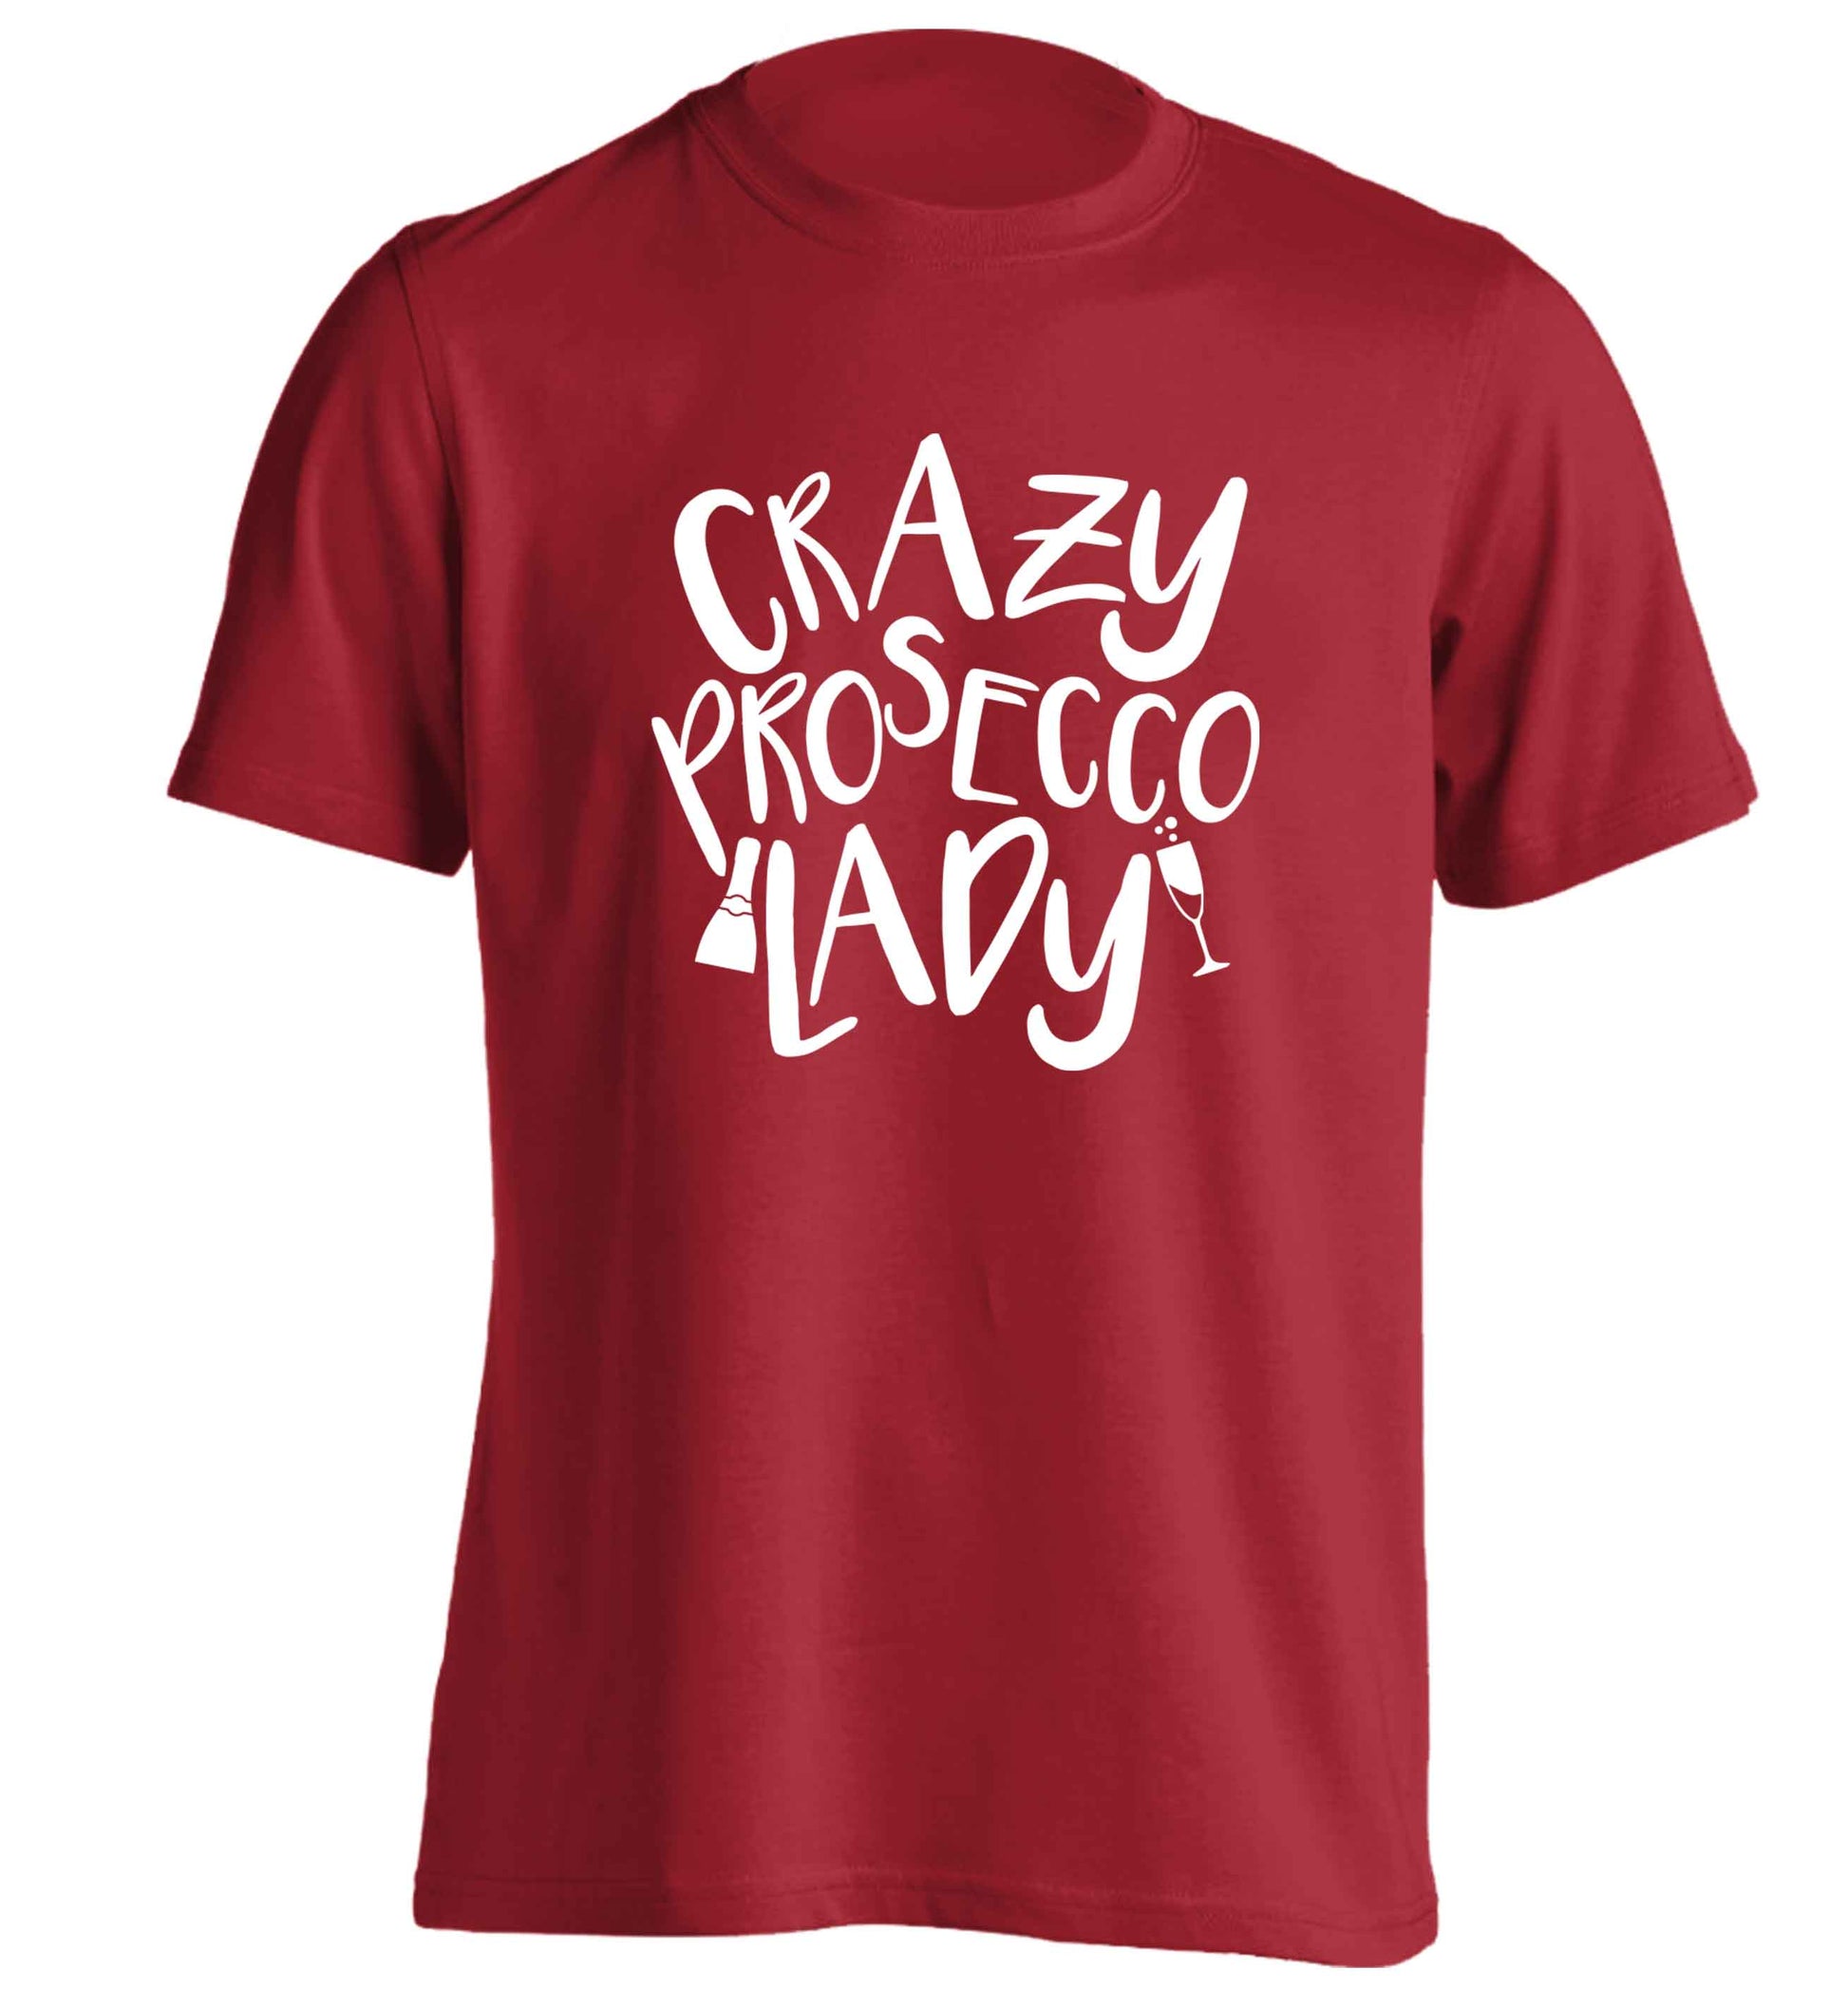 Crazy prosecco lady adults unisex red Tshirt 2XL